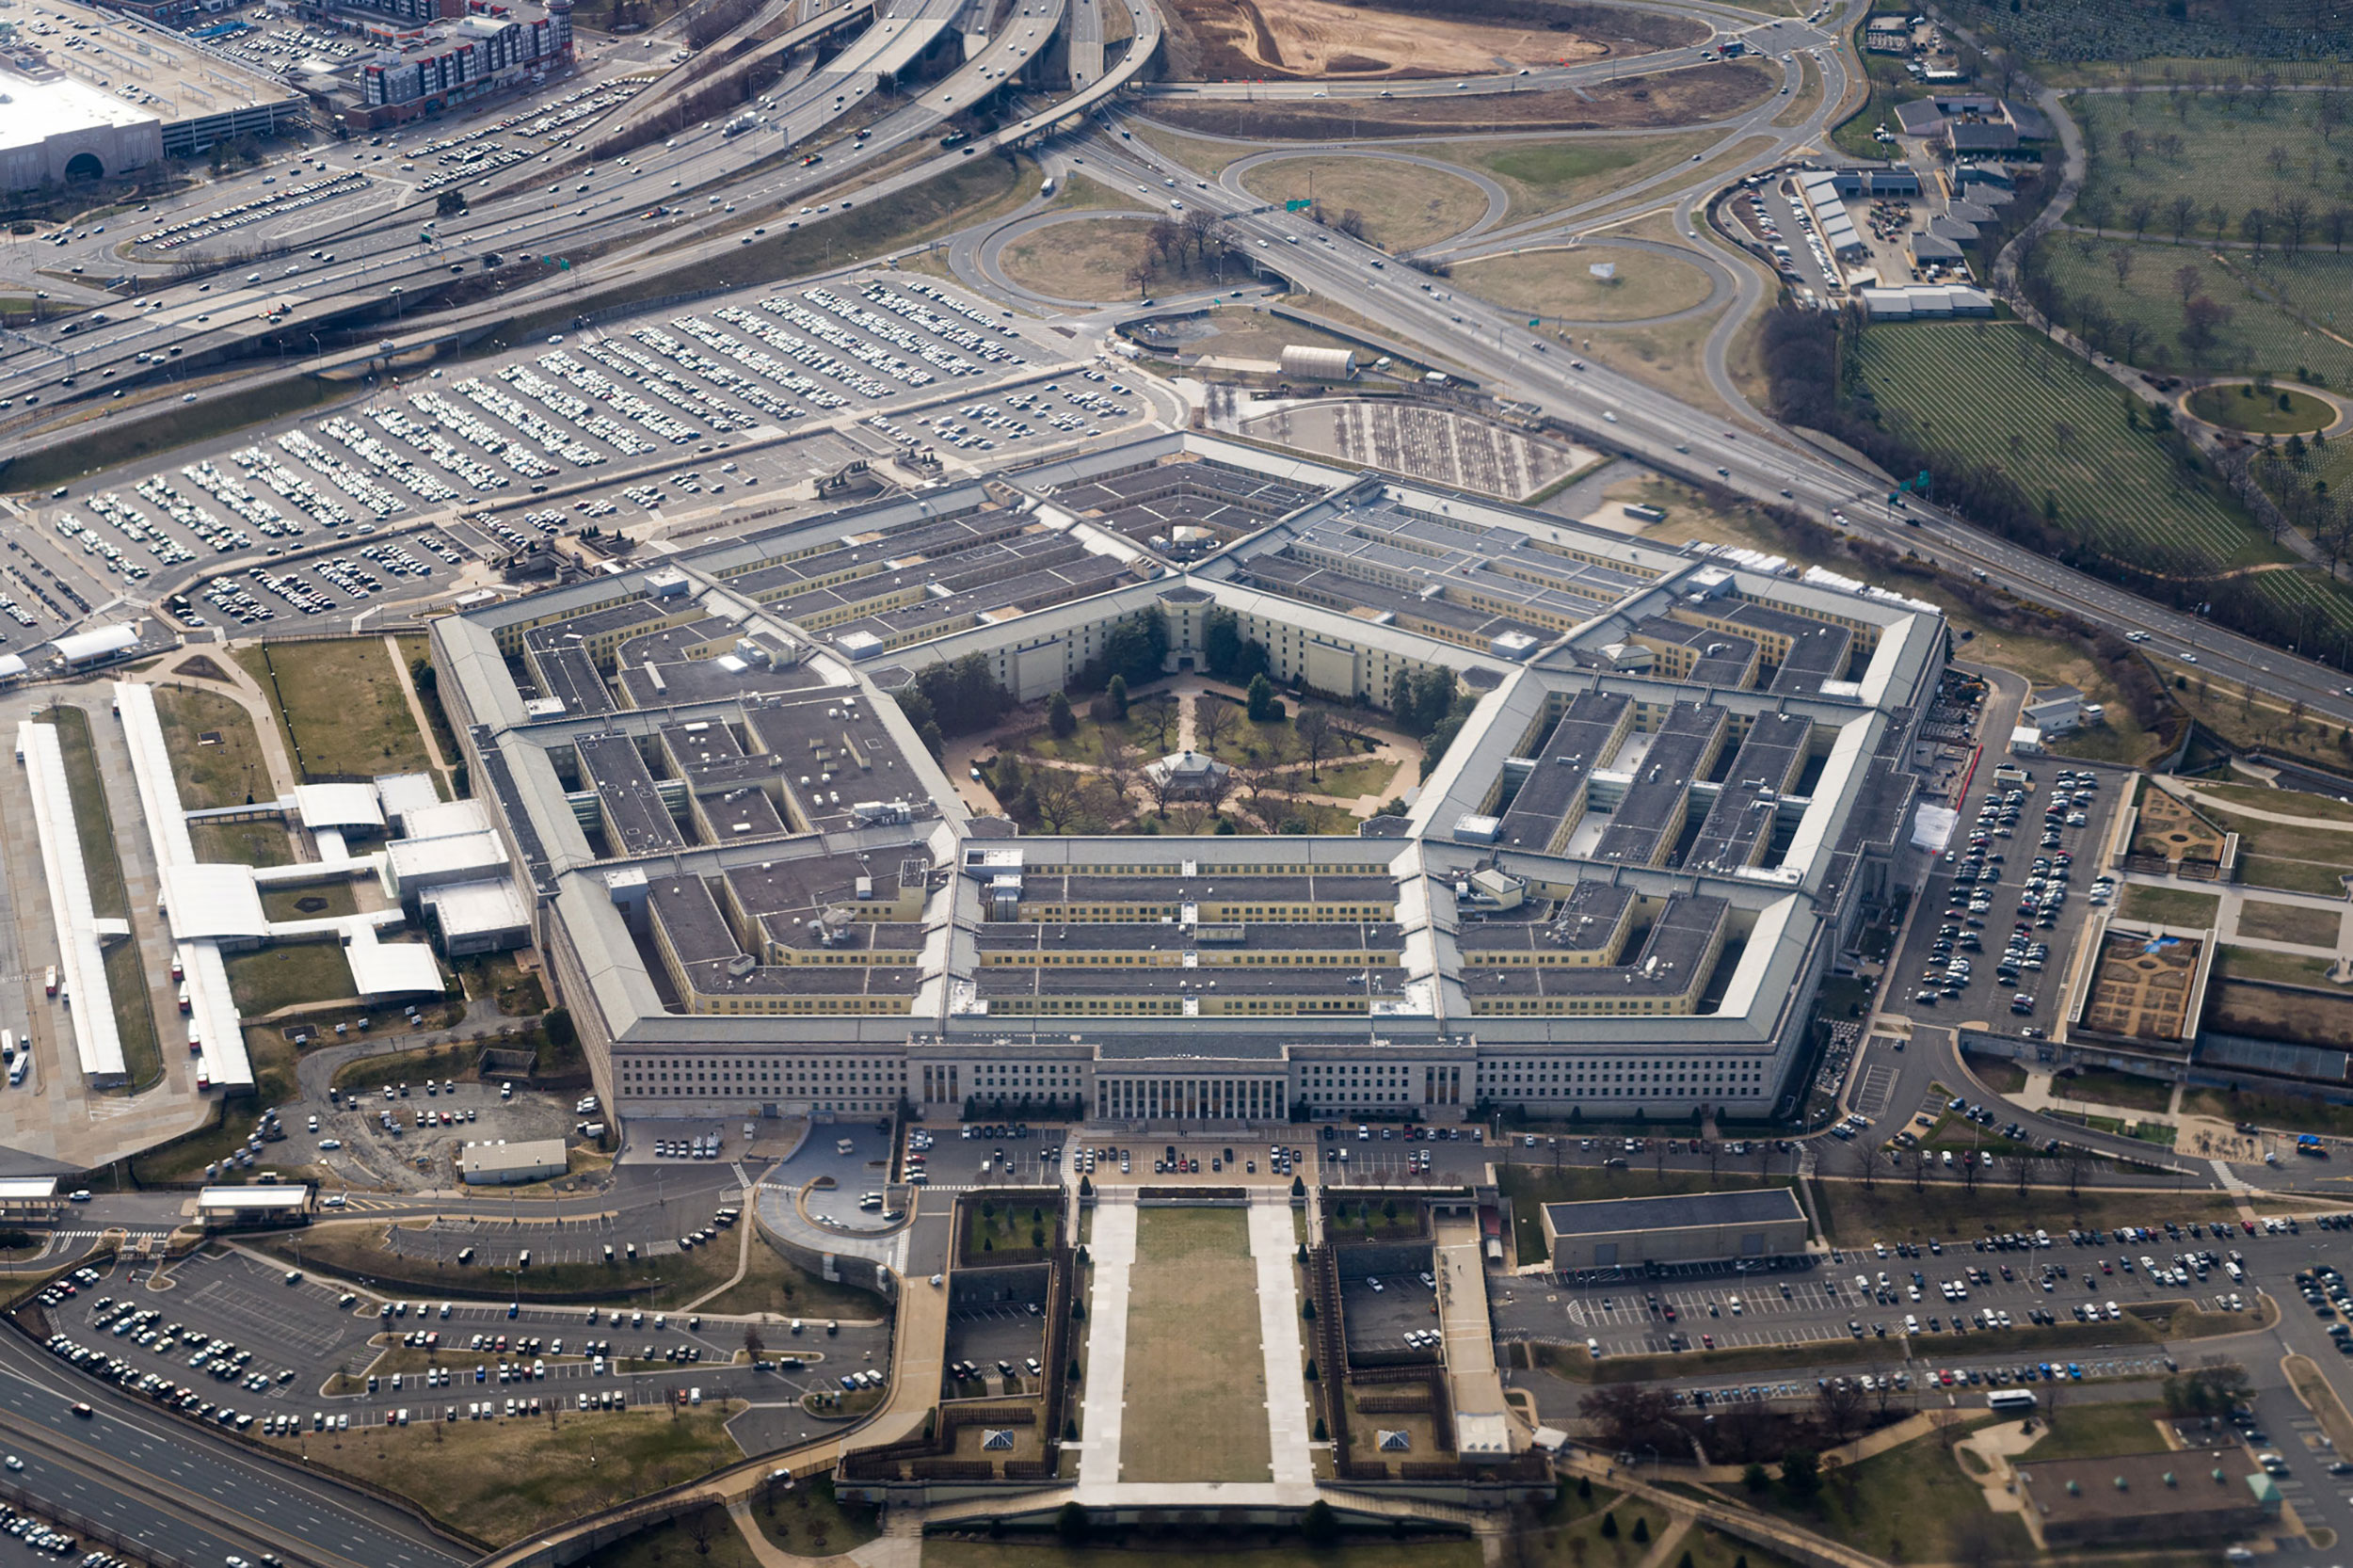 The Pentagon is seen from the air in Washington, on March 3, 2022.